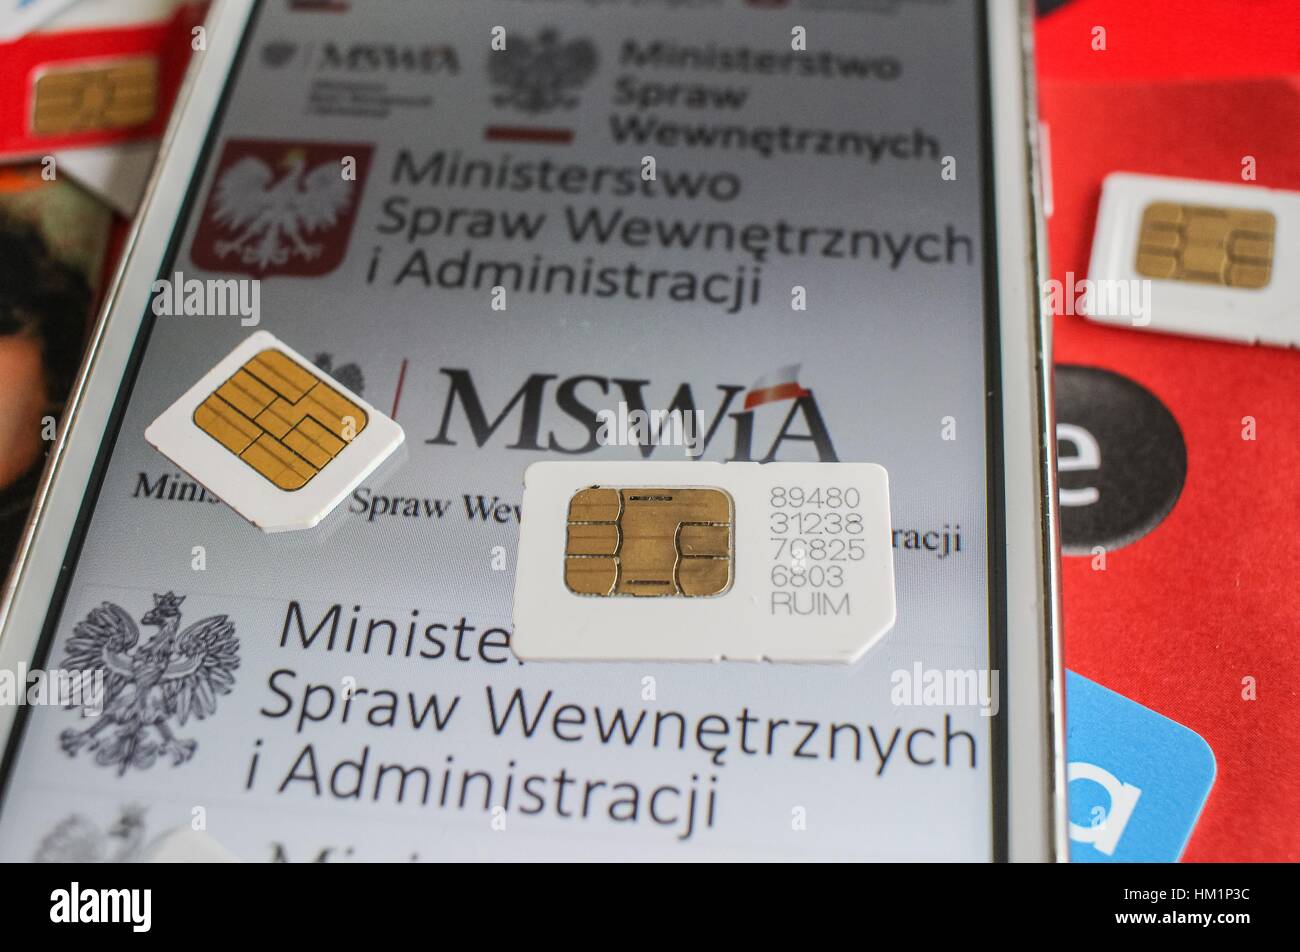 Gdansk, Poland. 01st Feb, 2017. Different types of Polish SIM cards are seen on 1 February 2017 in Gdynia, Poland. February 1st, is the last day that owners of pre-paid SIM cards in Poland have to comply with mandatory registration with their providers, before their service is cut off. The registration is the result of a law passed in 2016 requiring all mobile numbers to be linked with the identity of the owner, officialy to curb terrorism. Credit: Michal Fludra/Alamy Live News Stock Photo